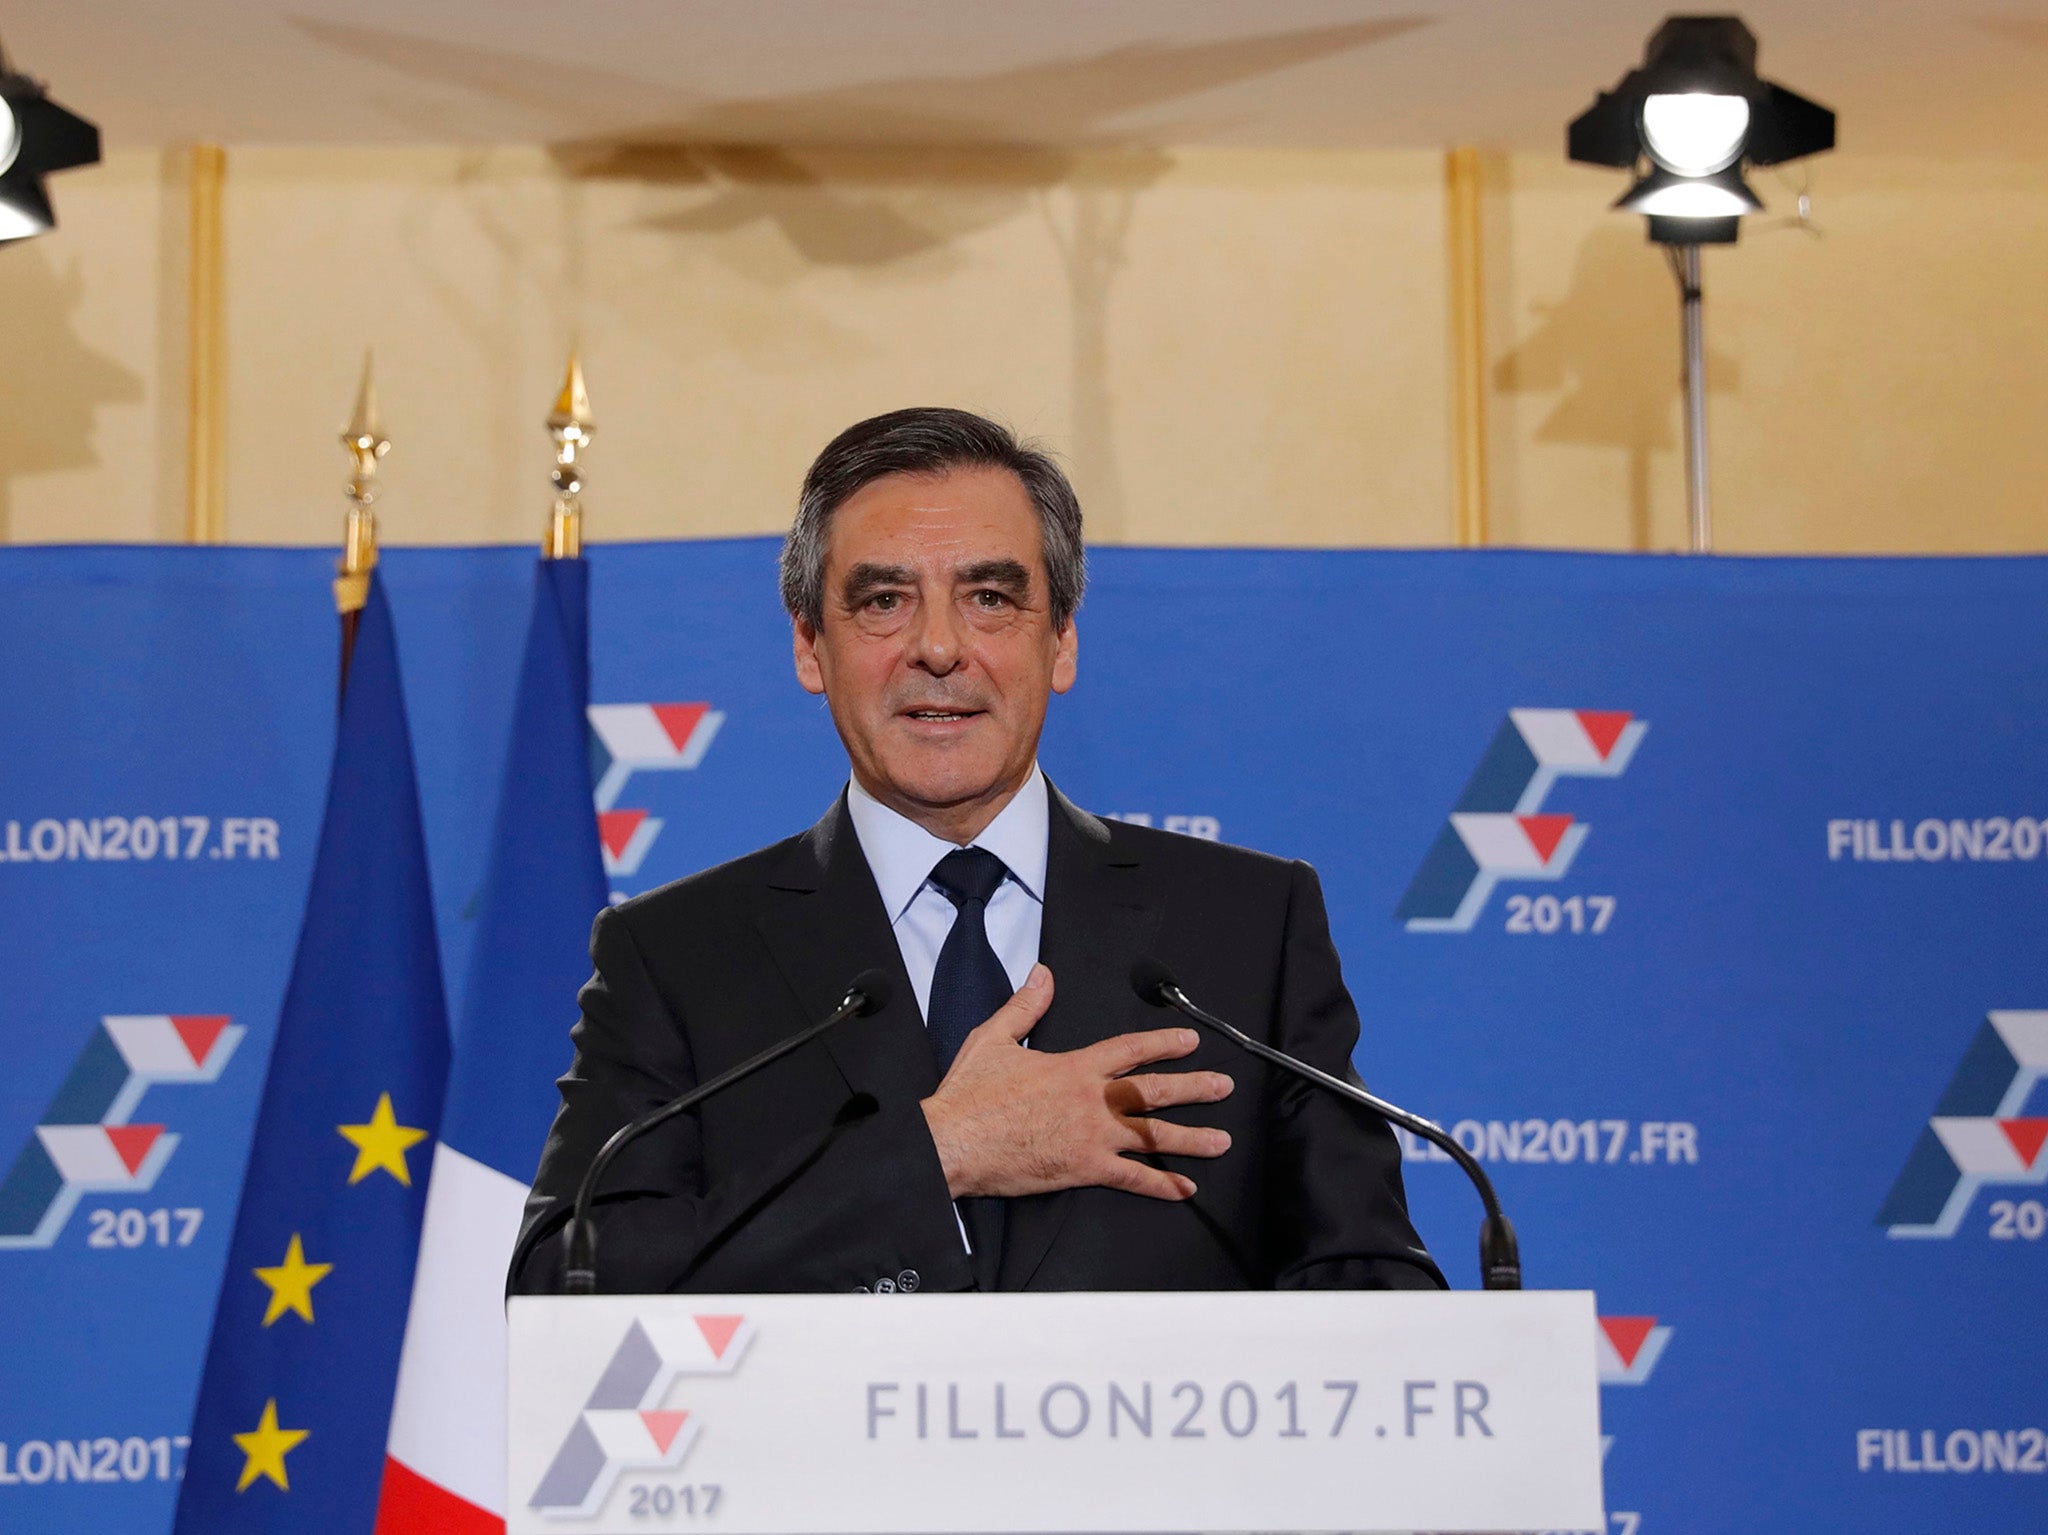 Mr Fillon is currently favourite to win the French election